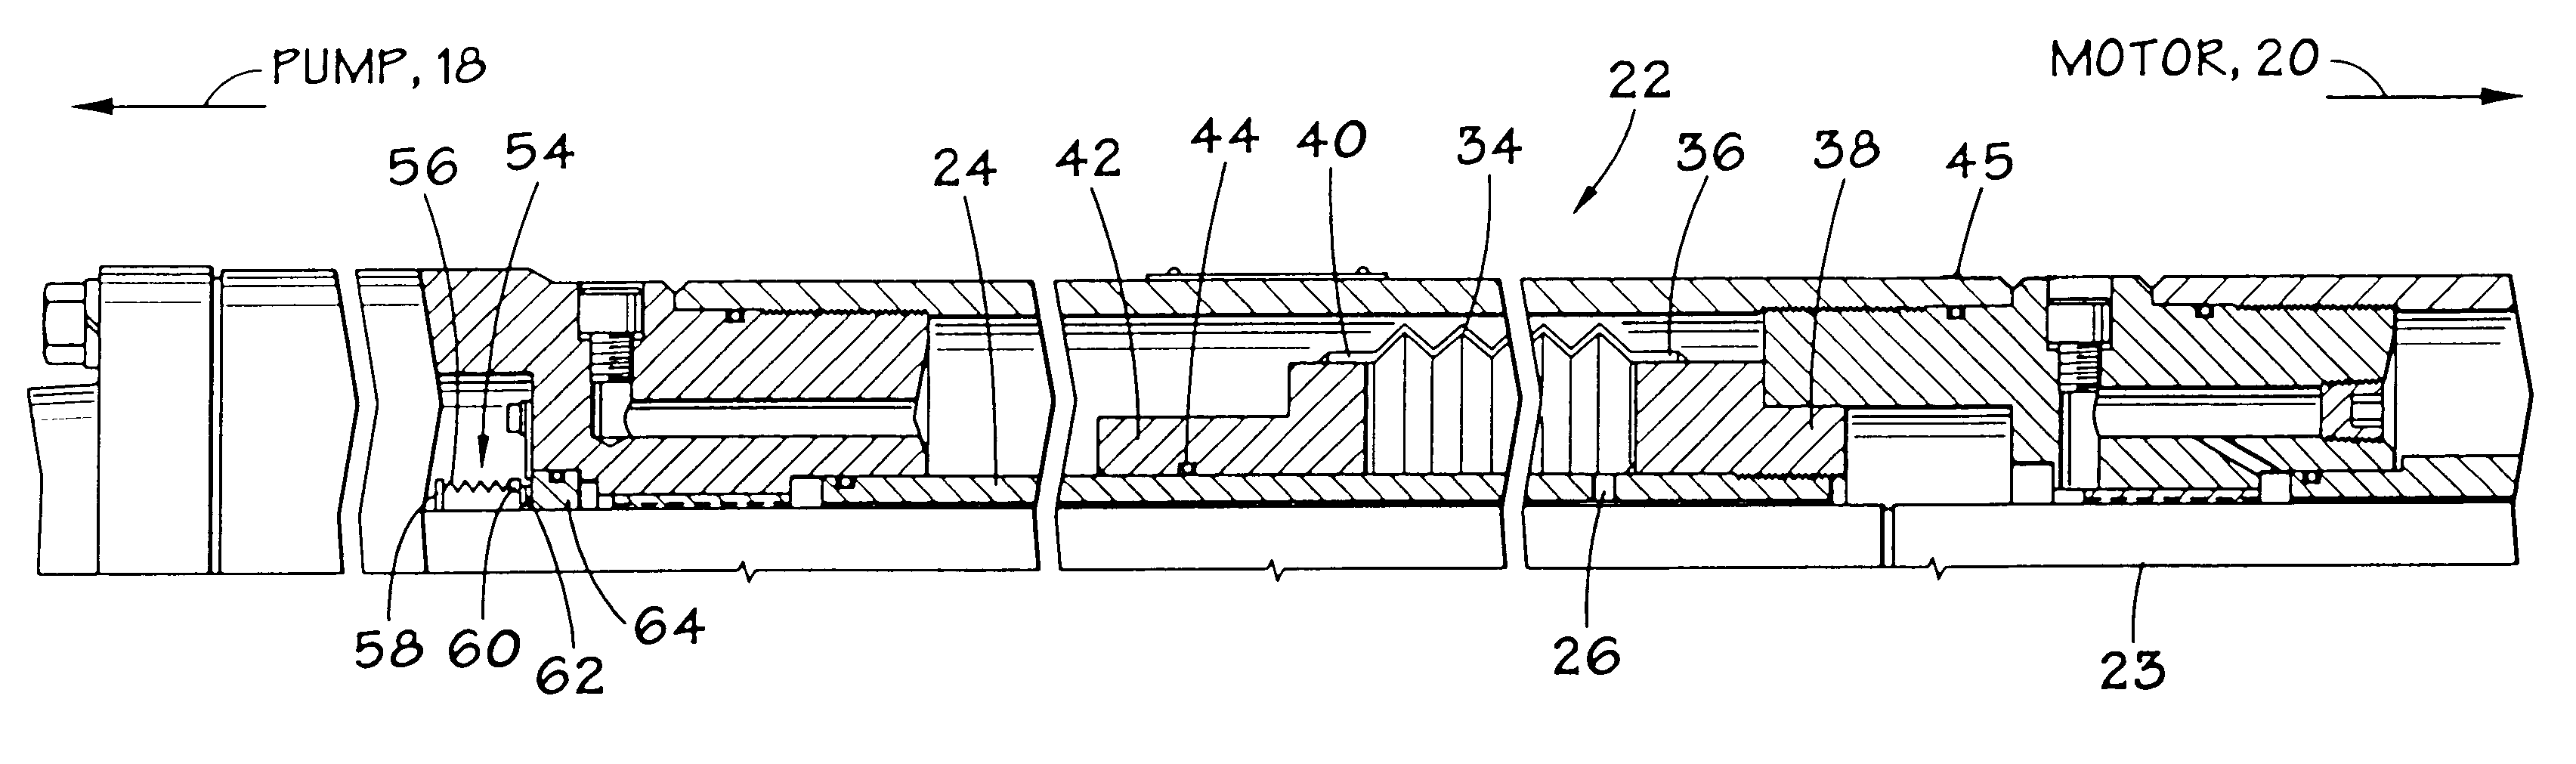 Submersible pumping system utilizing a motor protector having a metal bellows